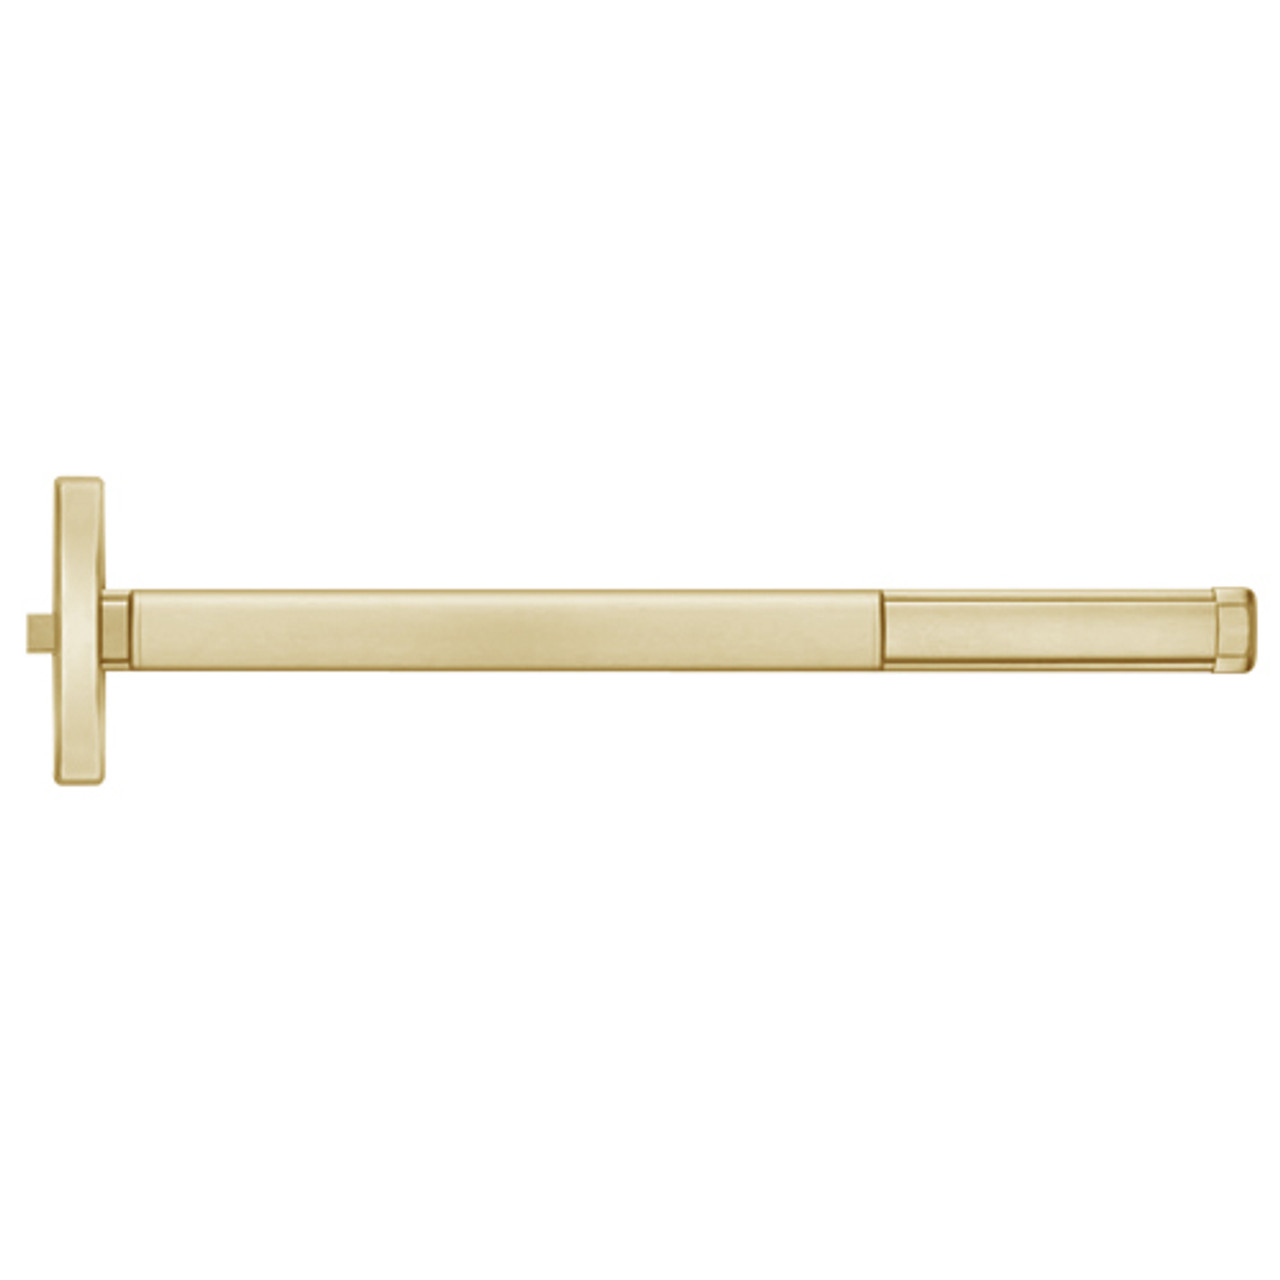 MLR2402-606-36 PHI 2400 Series Non Fire Rated Apex Rim Exit Device with Motorized Latch Retraction Prepped for Dummy Trim in Satin Brass Finish